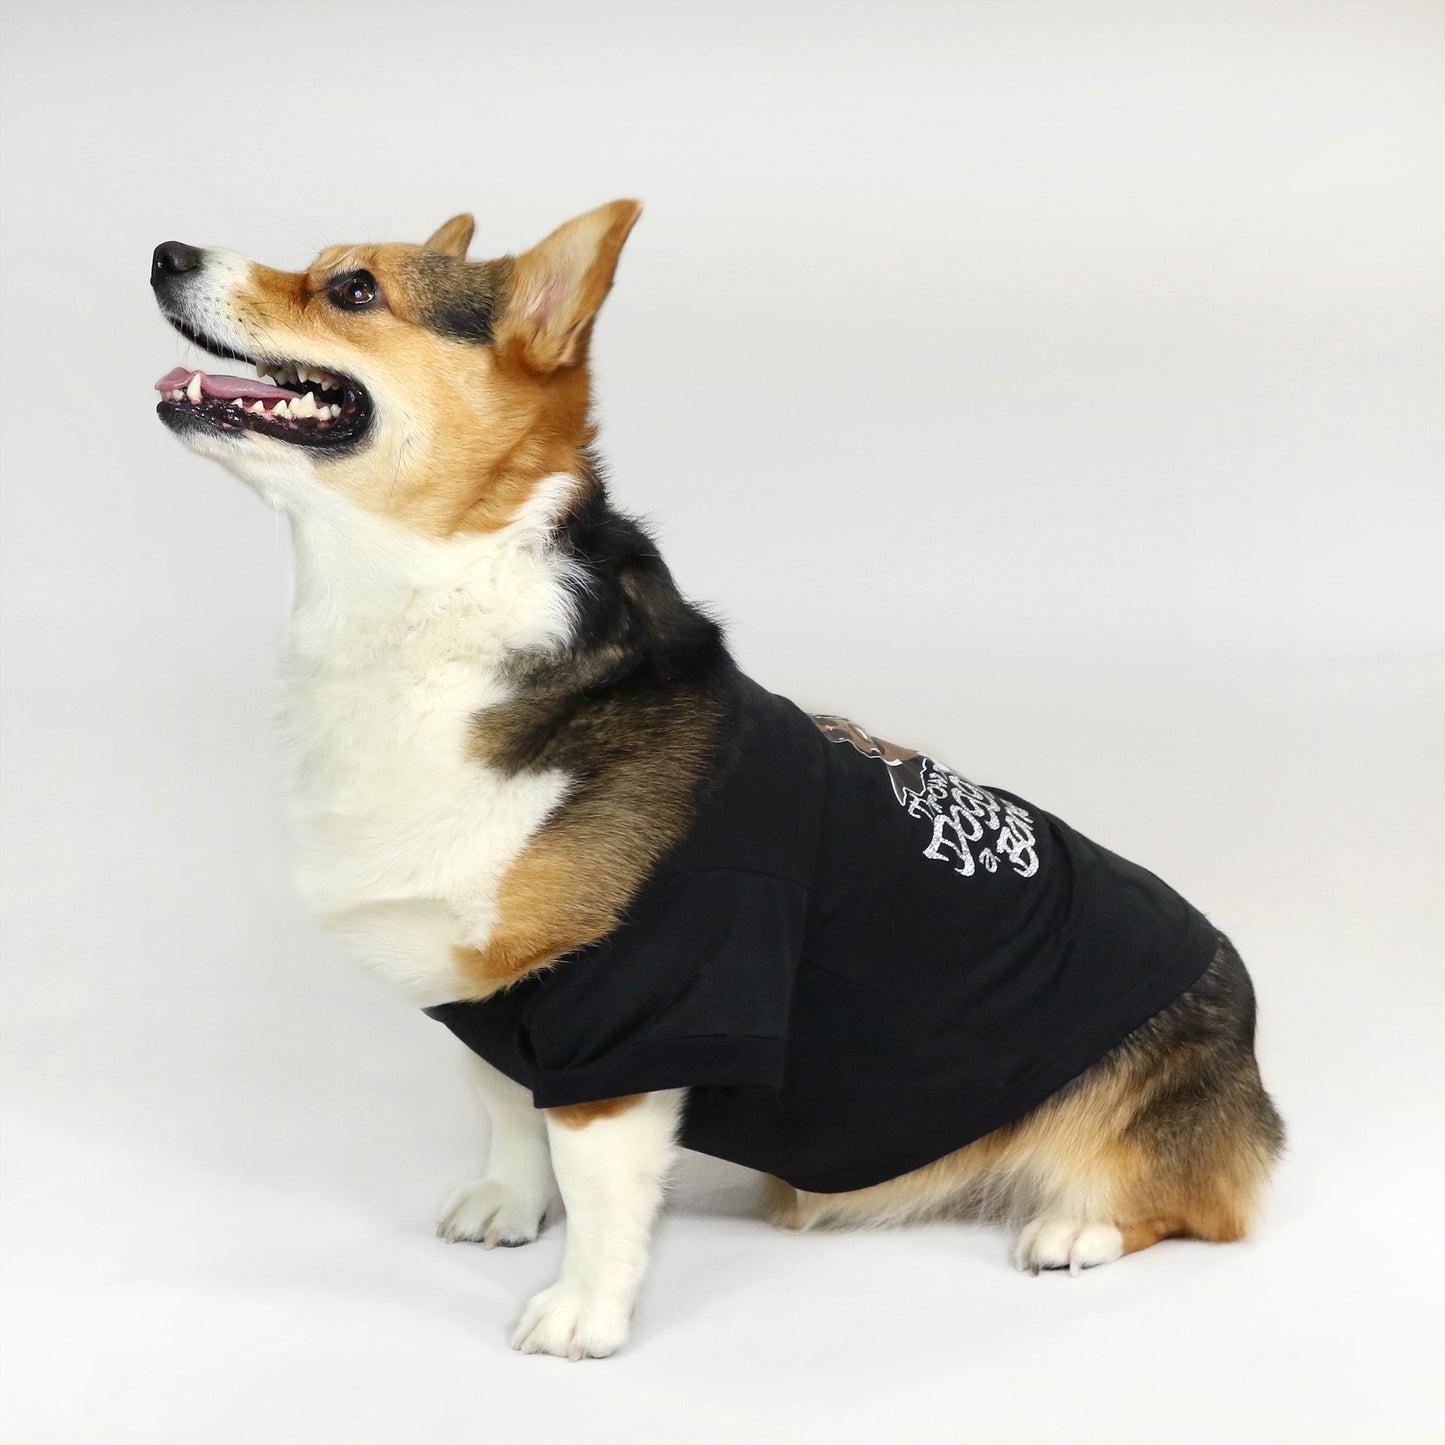 Sunny the Corgi wearing the Throw A Dogg A Bone Deluxe Pet T-Shirt in size Large.